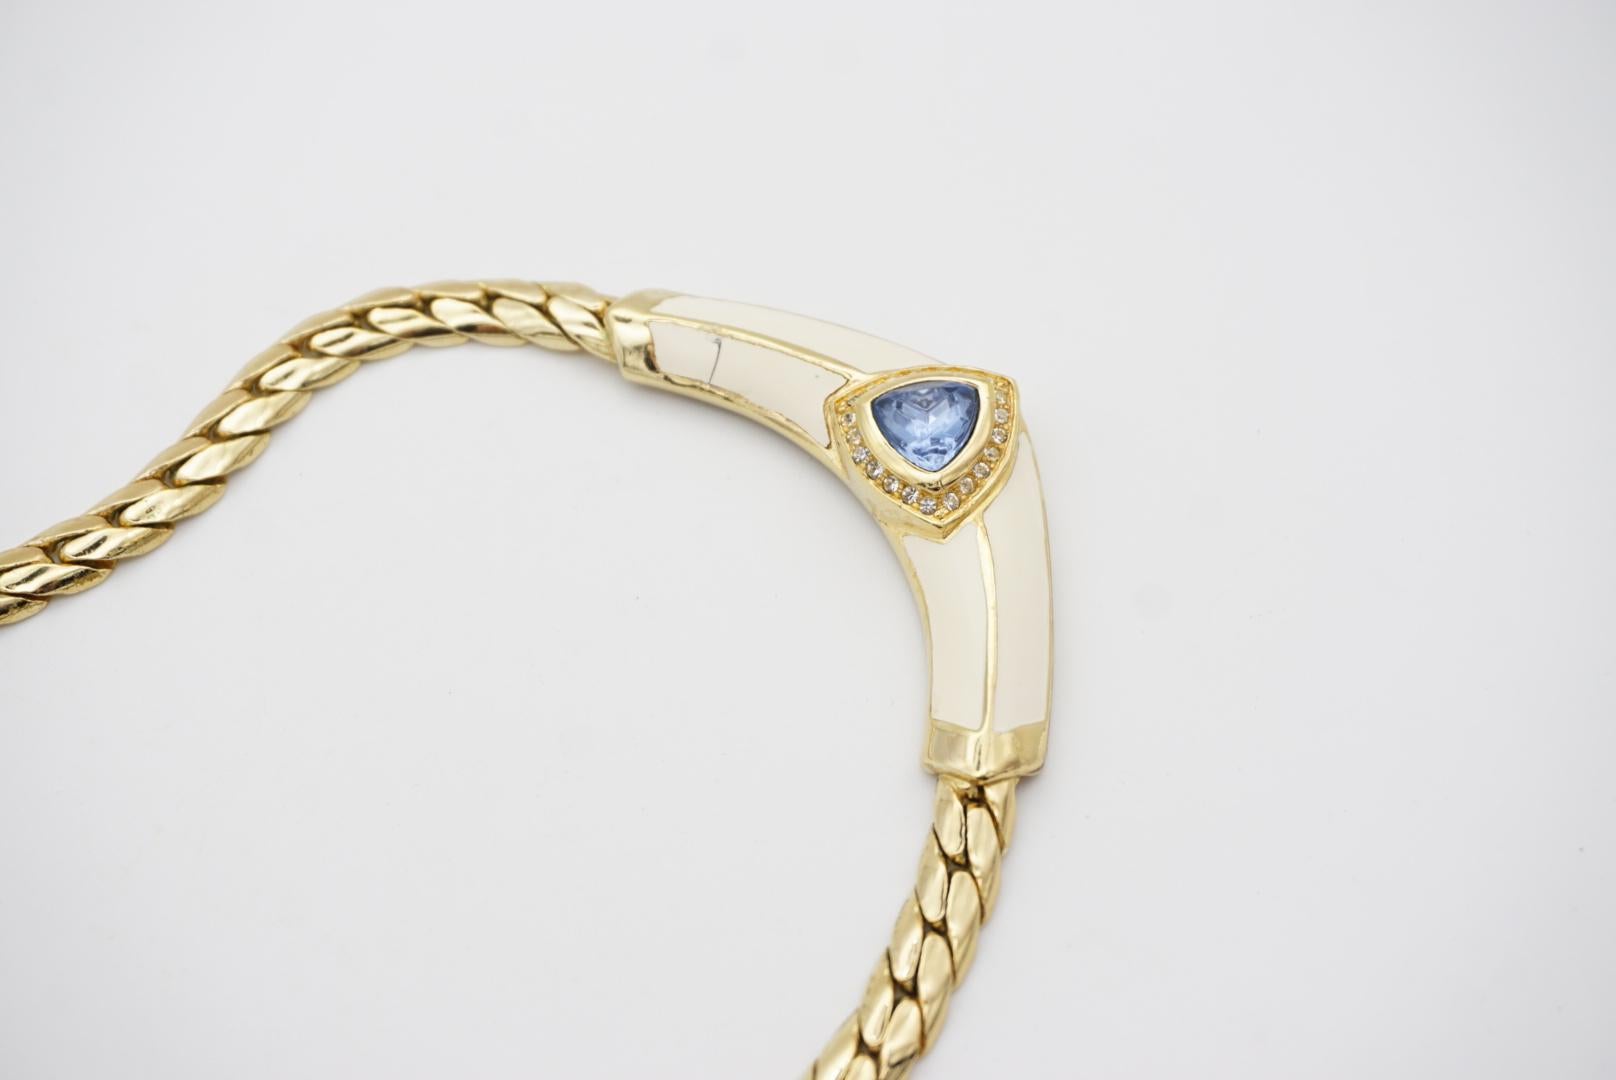 Christian Dior Vintage 1980s Aqua Blue Triangle Crystals Cream Gold Necklace For Sale 3